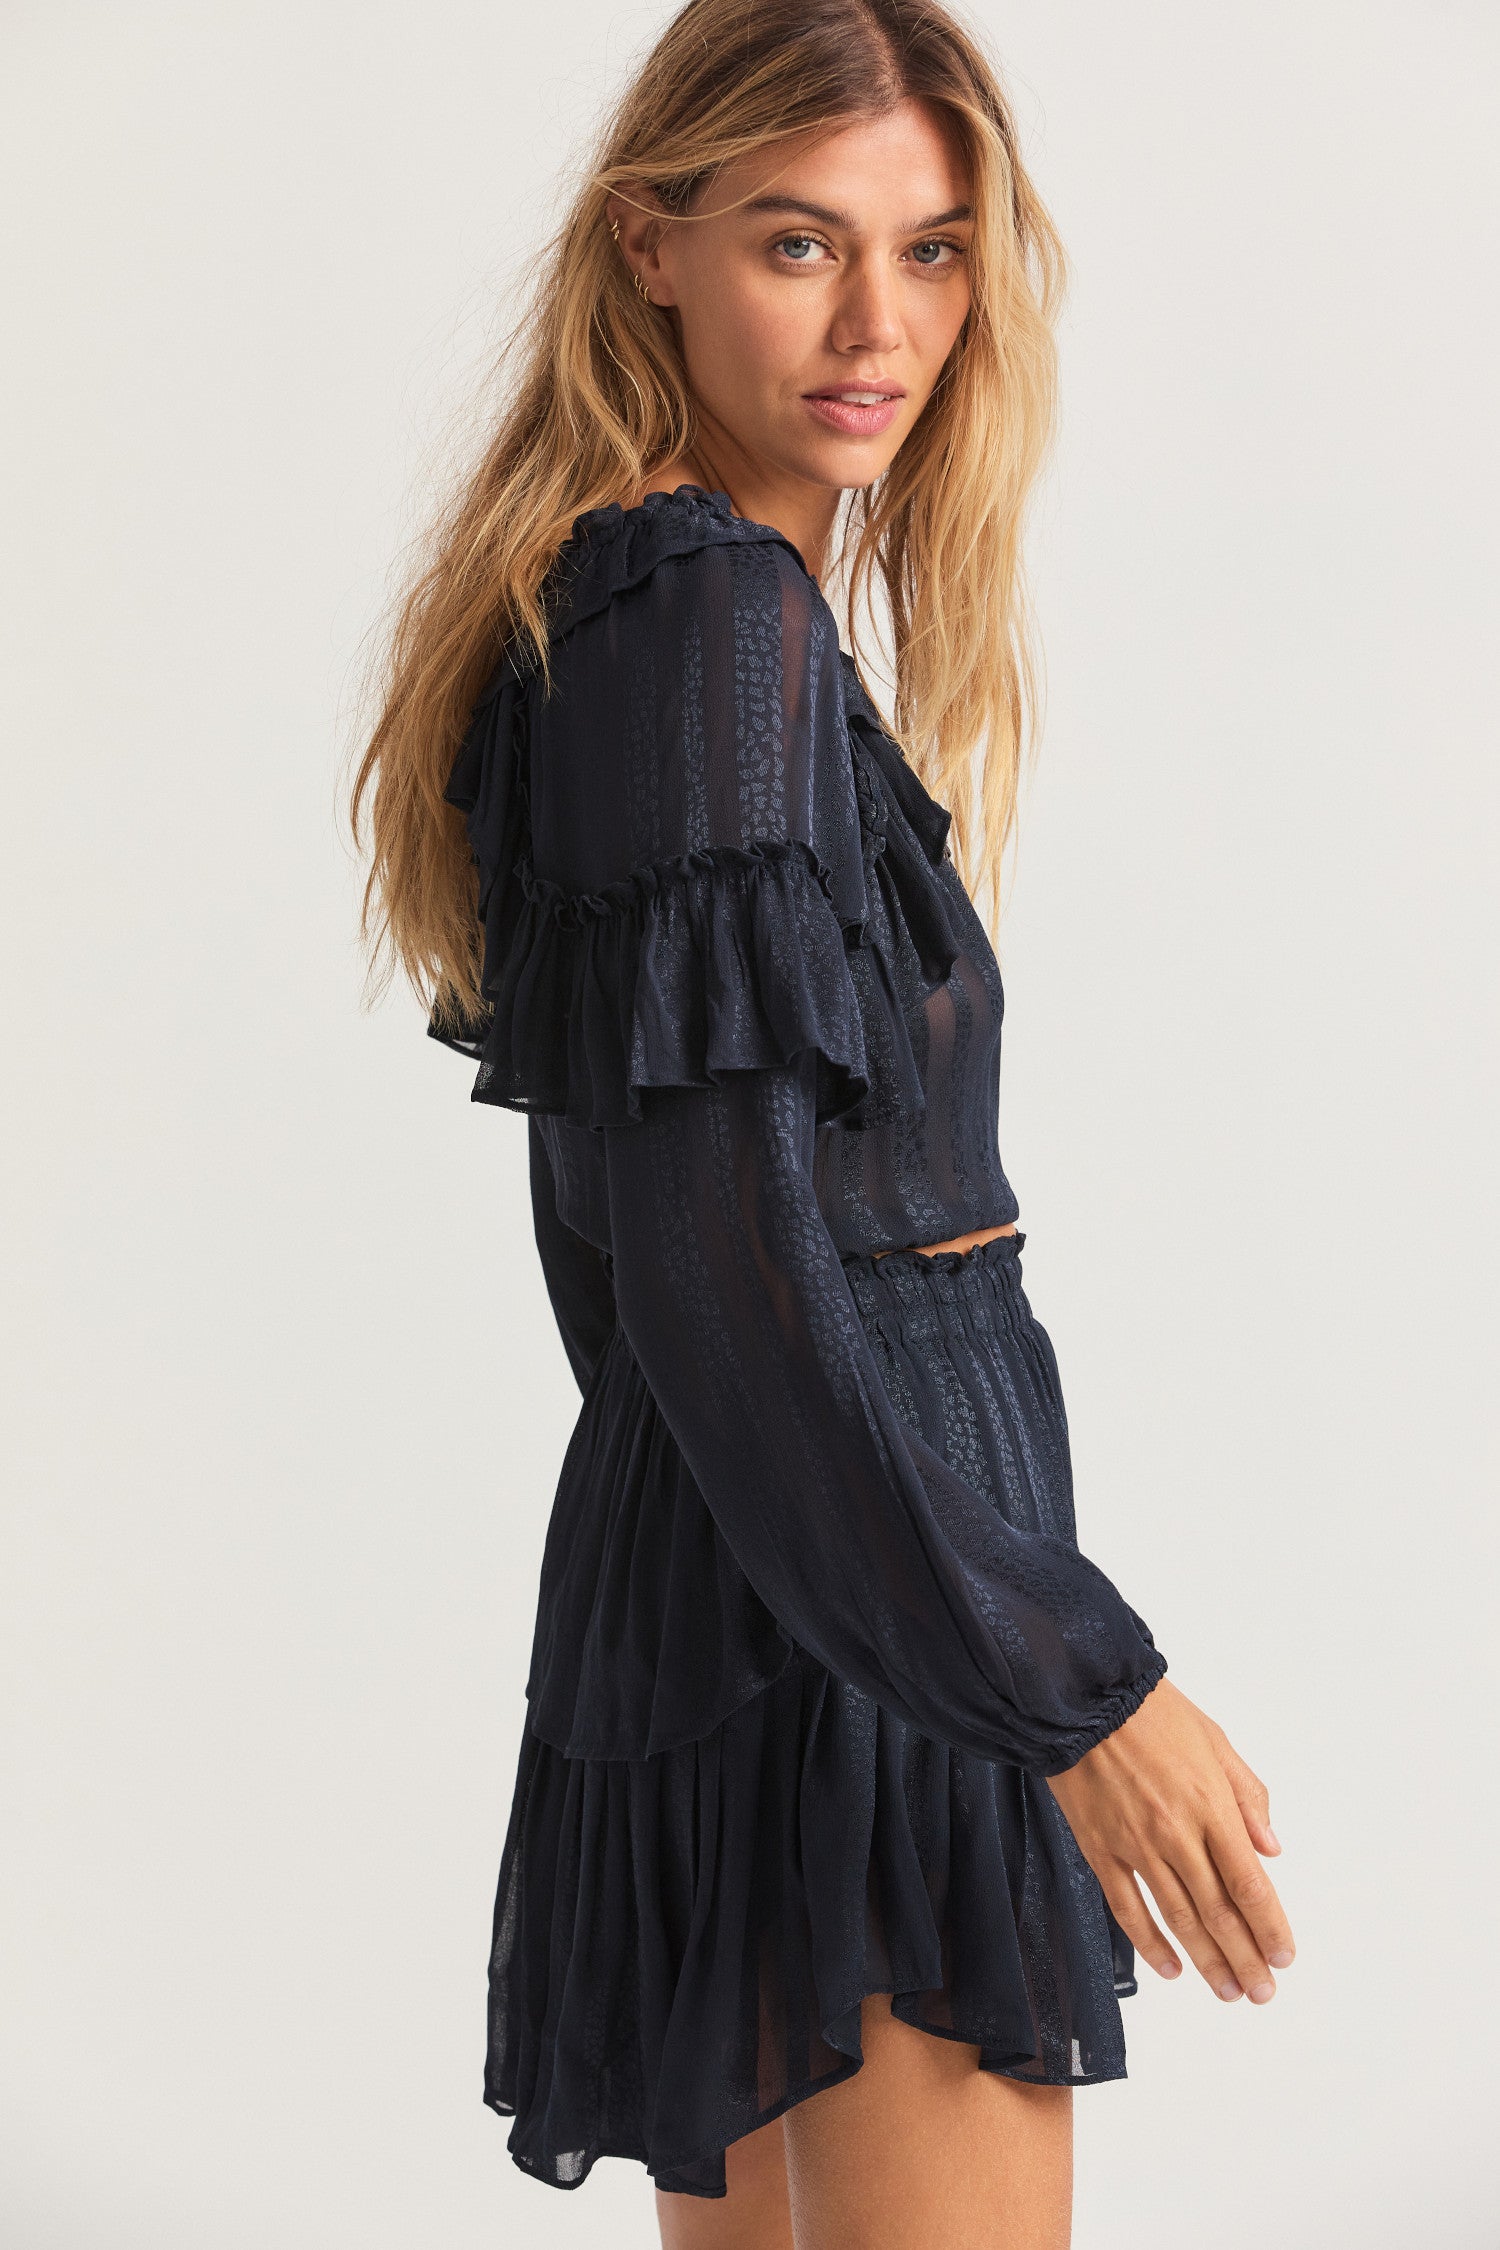 Black long sleeved-top features a striped jacquard fabric, dramatic ruffles all over, an elasticated waist, elastic at the sleeve openings, and a fully functioning center front slit.